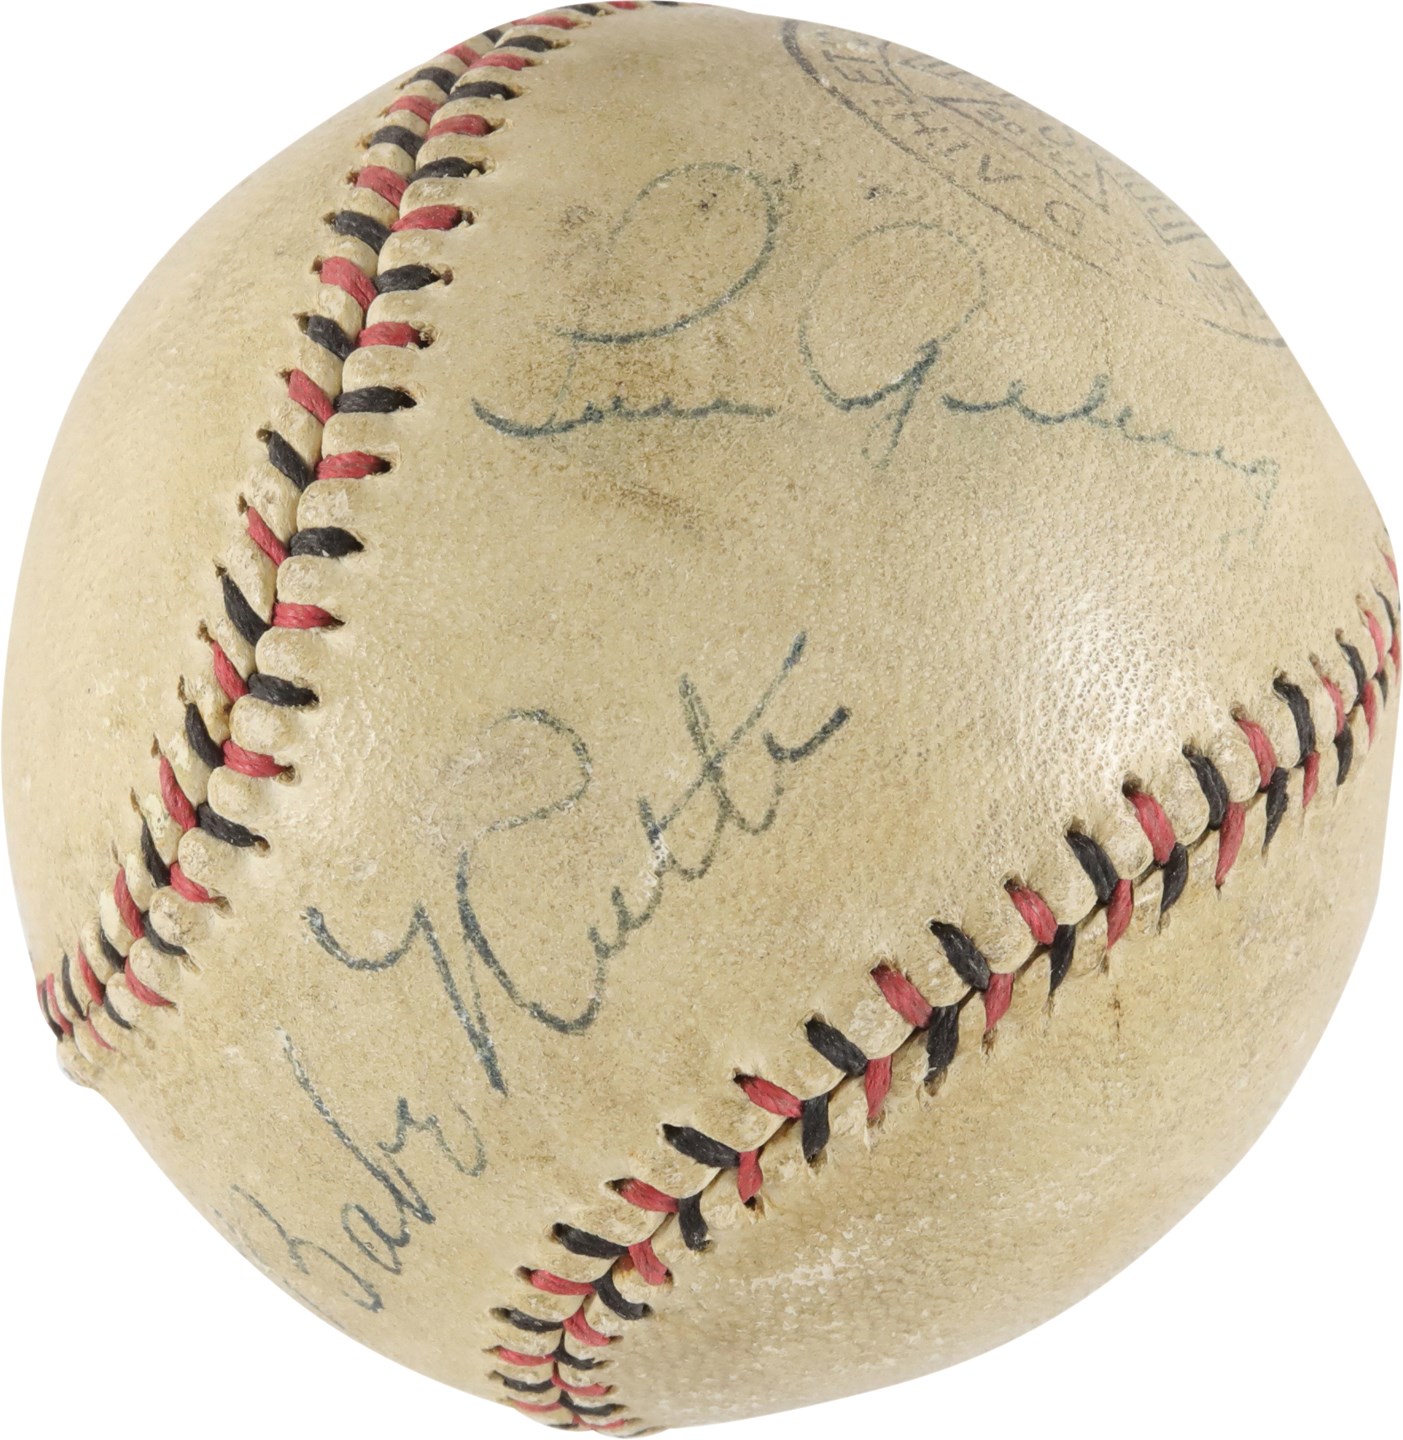 Ruth and Gehrig - 1930s Babe Ruth & Lou Gehrig Dual-Signed Baseball (PSA)